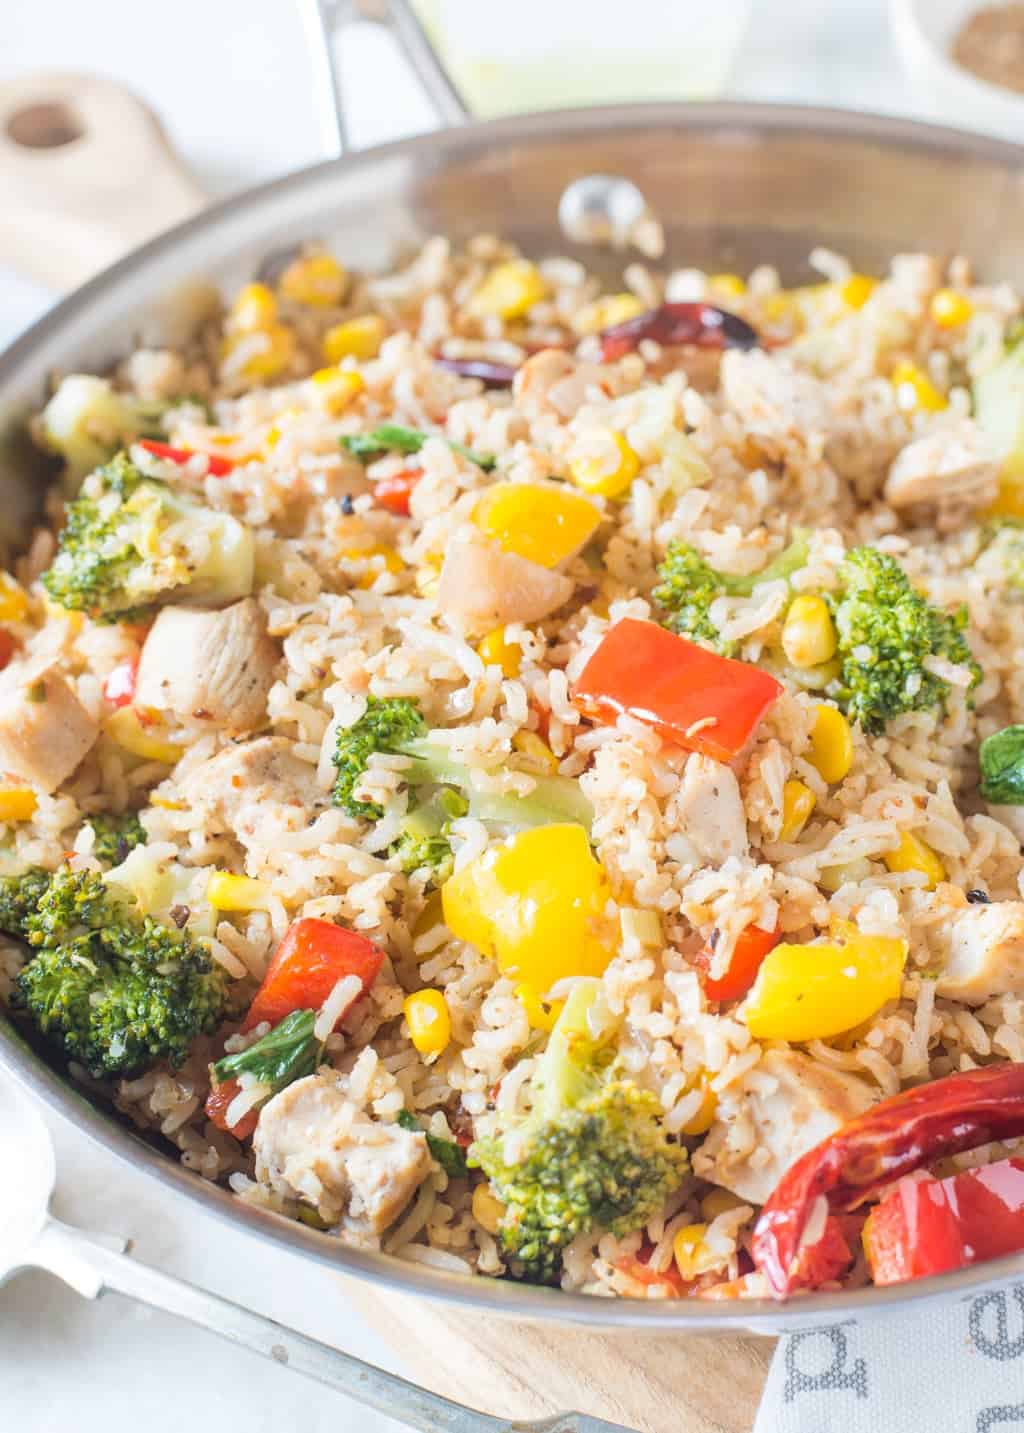 This Brown Rice Recipe with Chicken and vegetables is healthy, filling and easy to make. When made with leftover rice and precut vegetables, it would take less than 15 minutes.